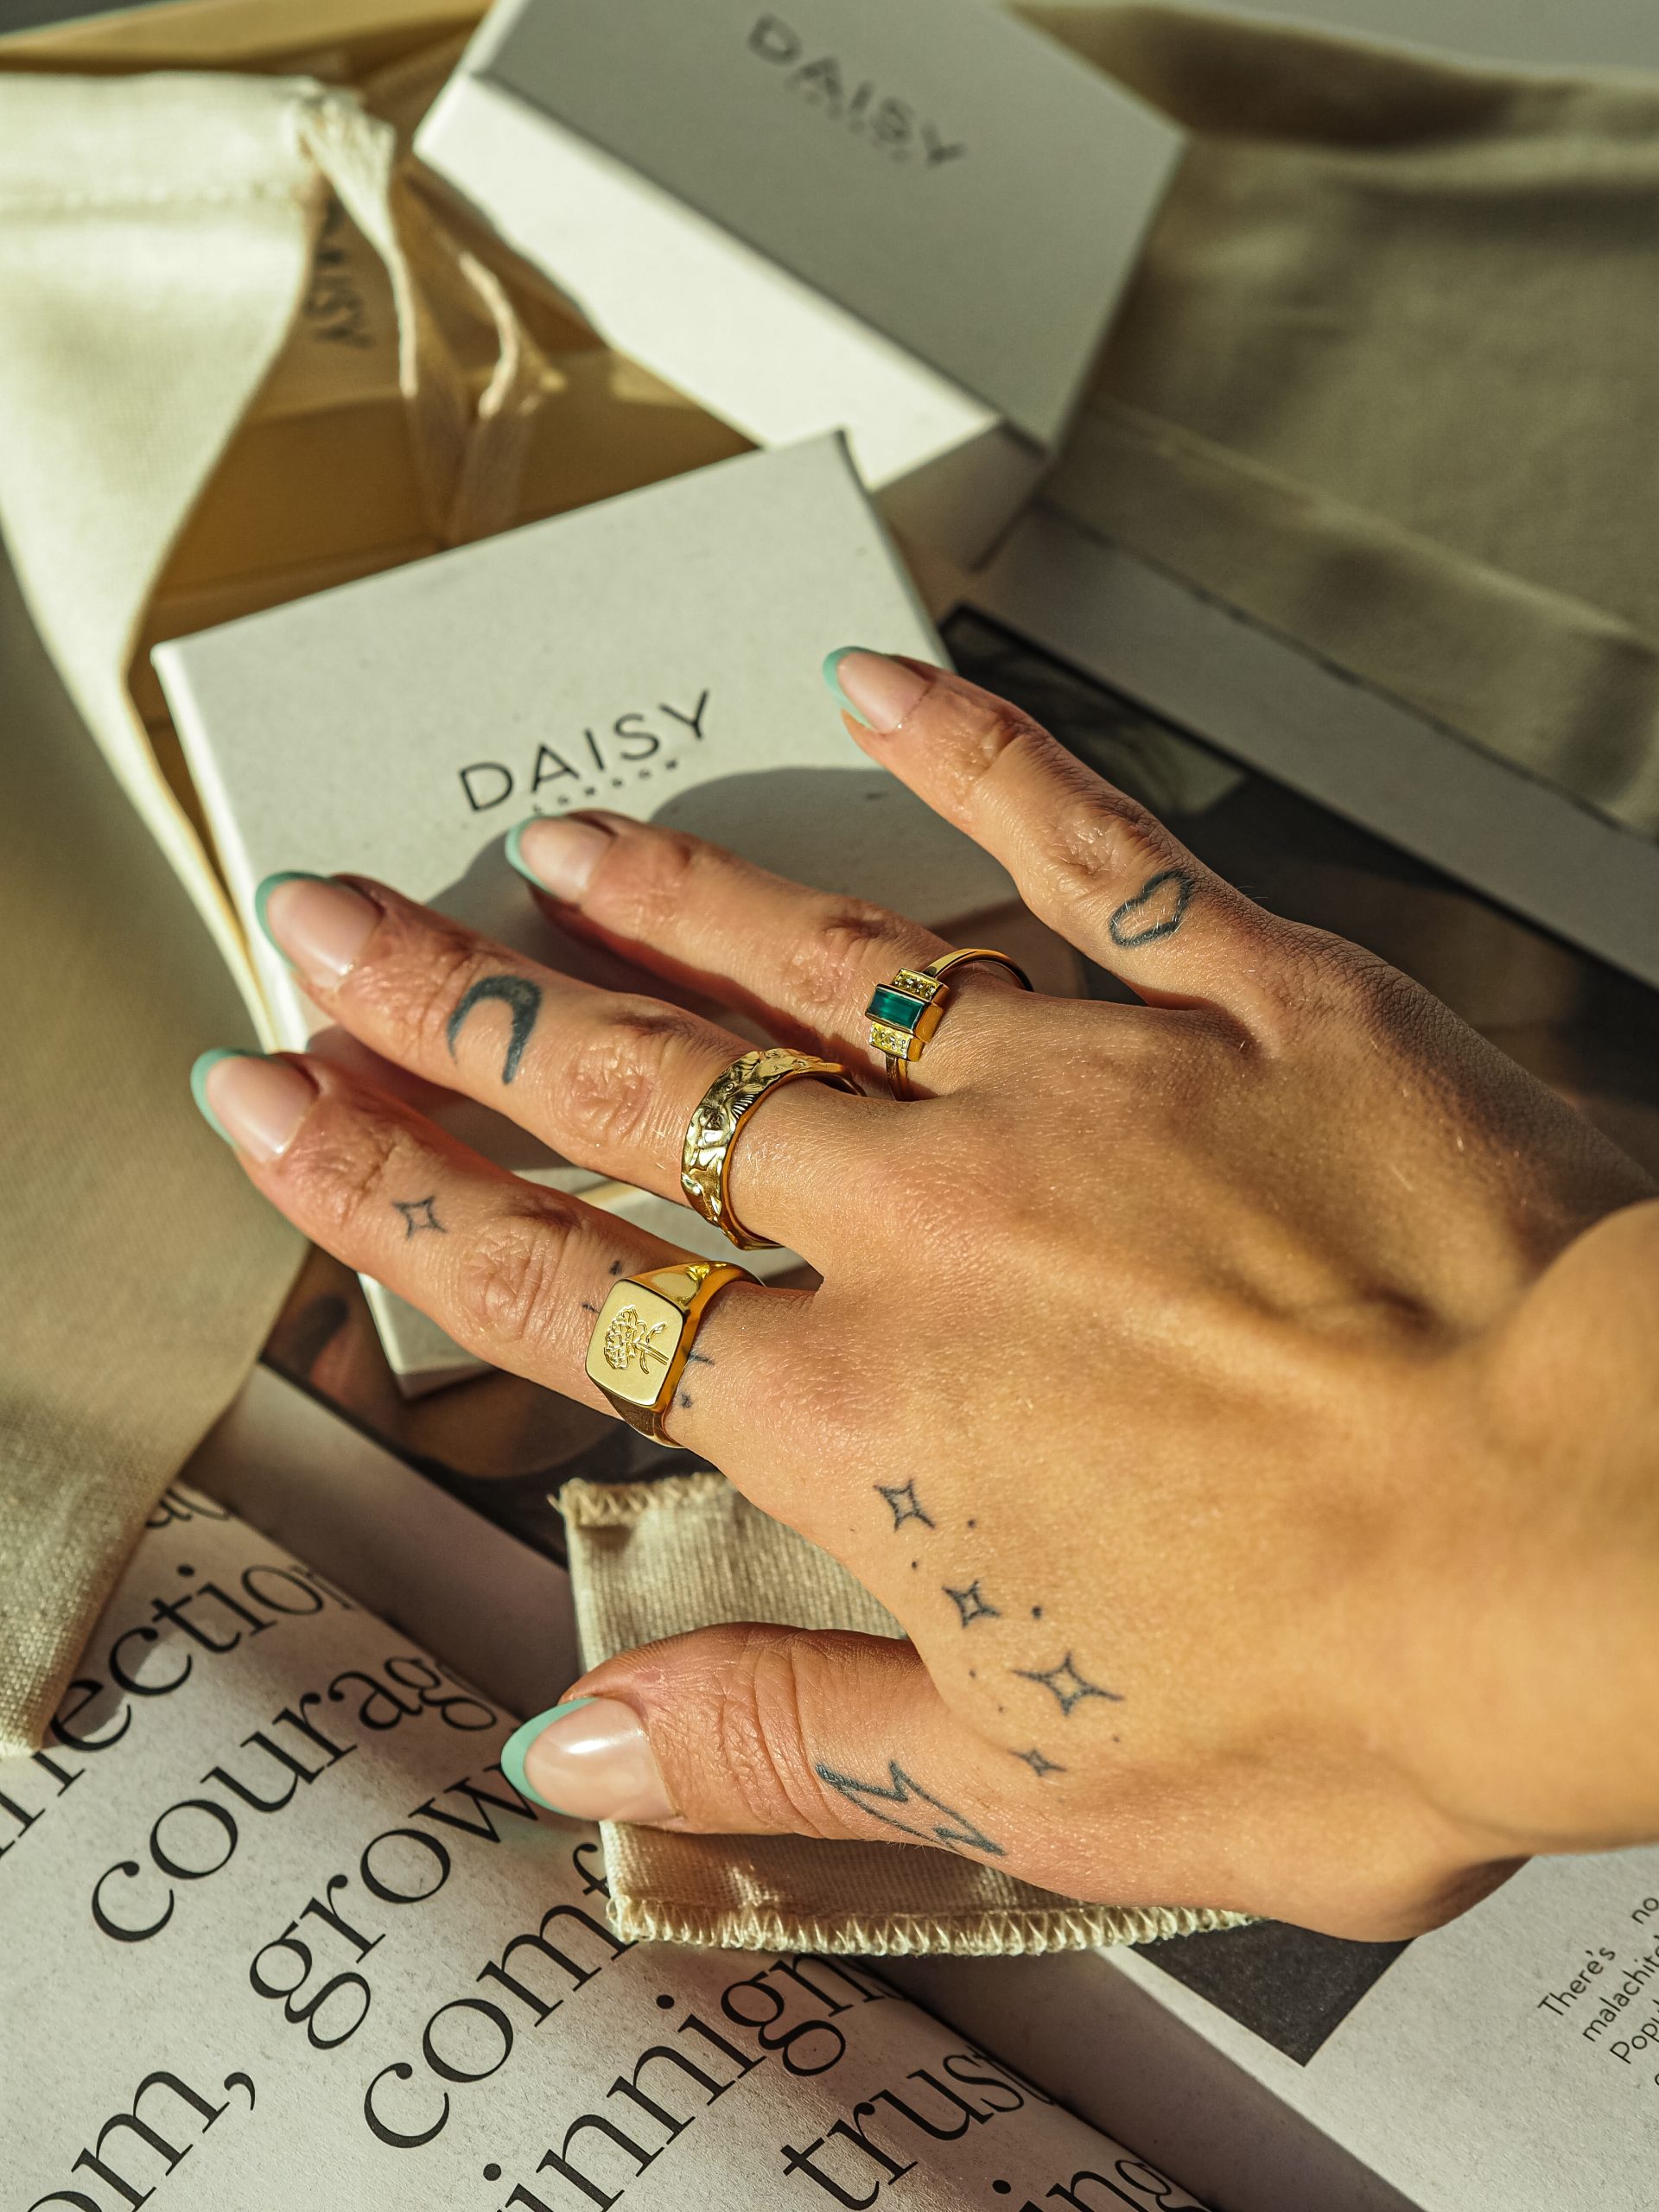 Laura Kate Lucas - Manchester Fashion, Lifestyle and Travel Blogger | Daisy London Jewellery Rings